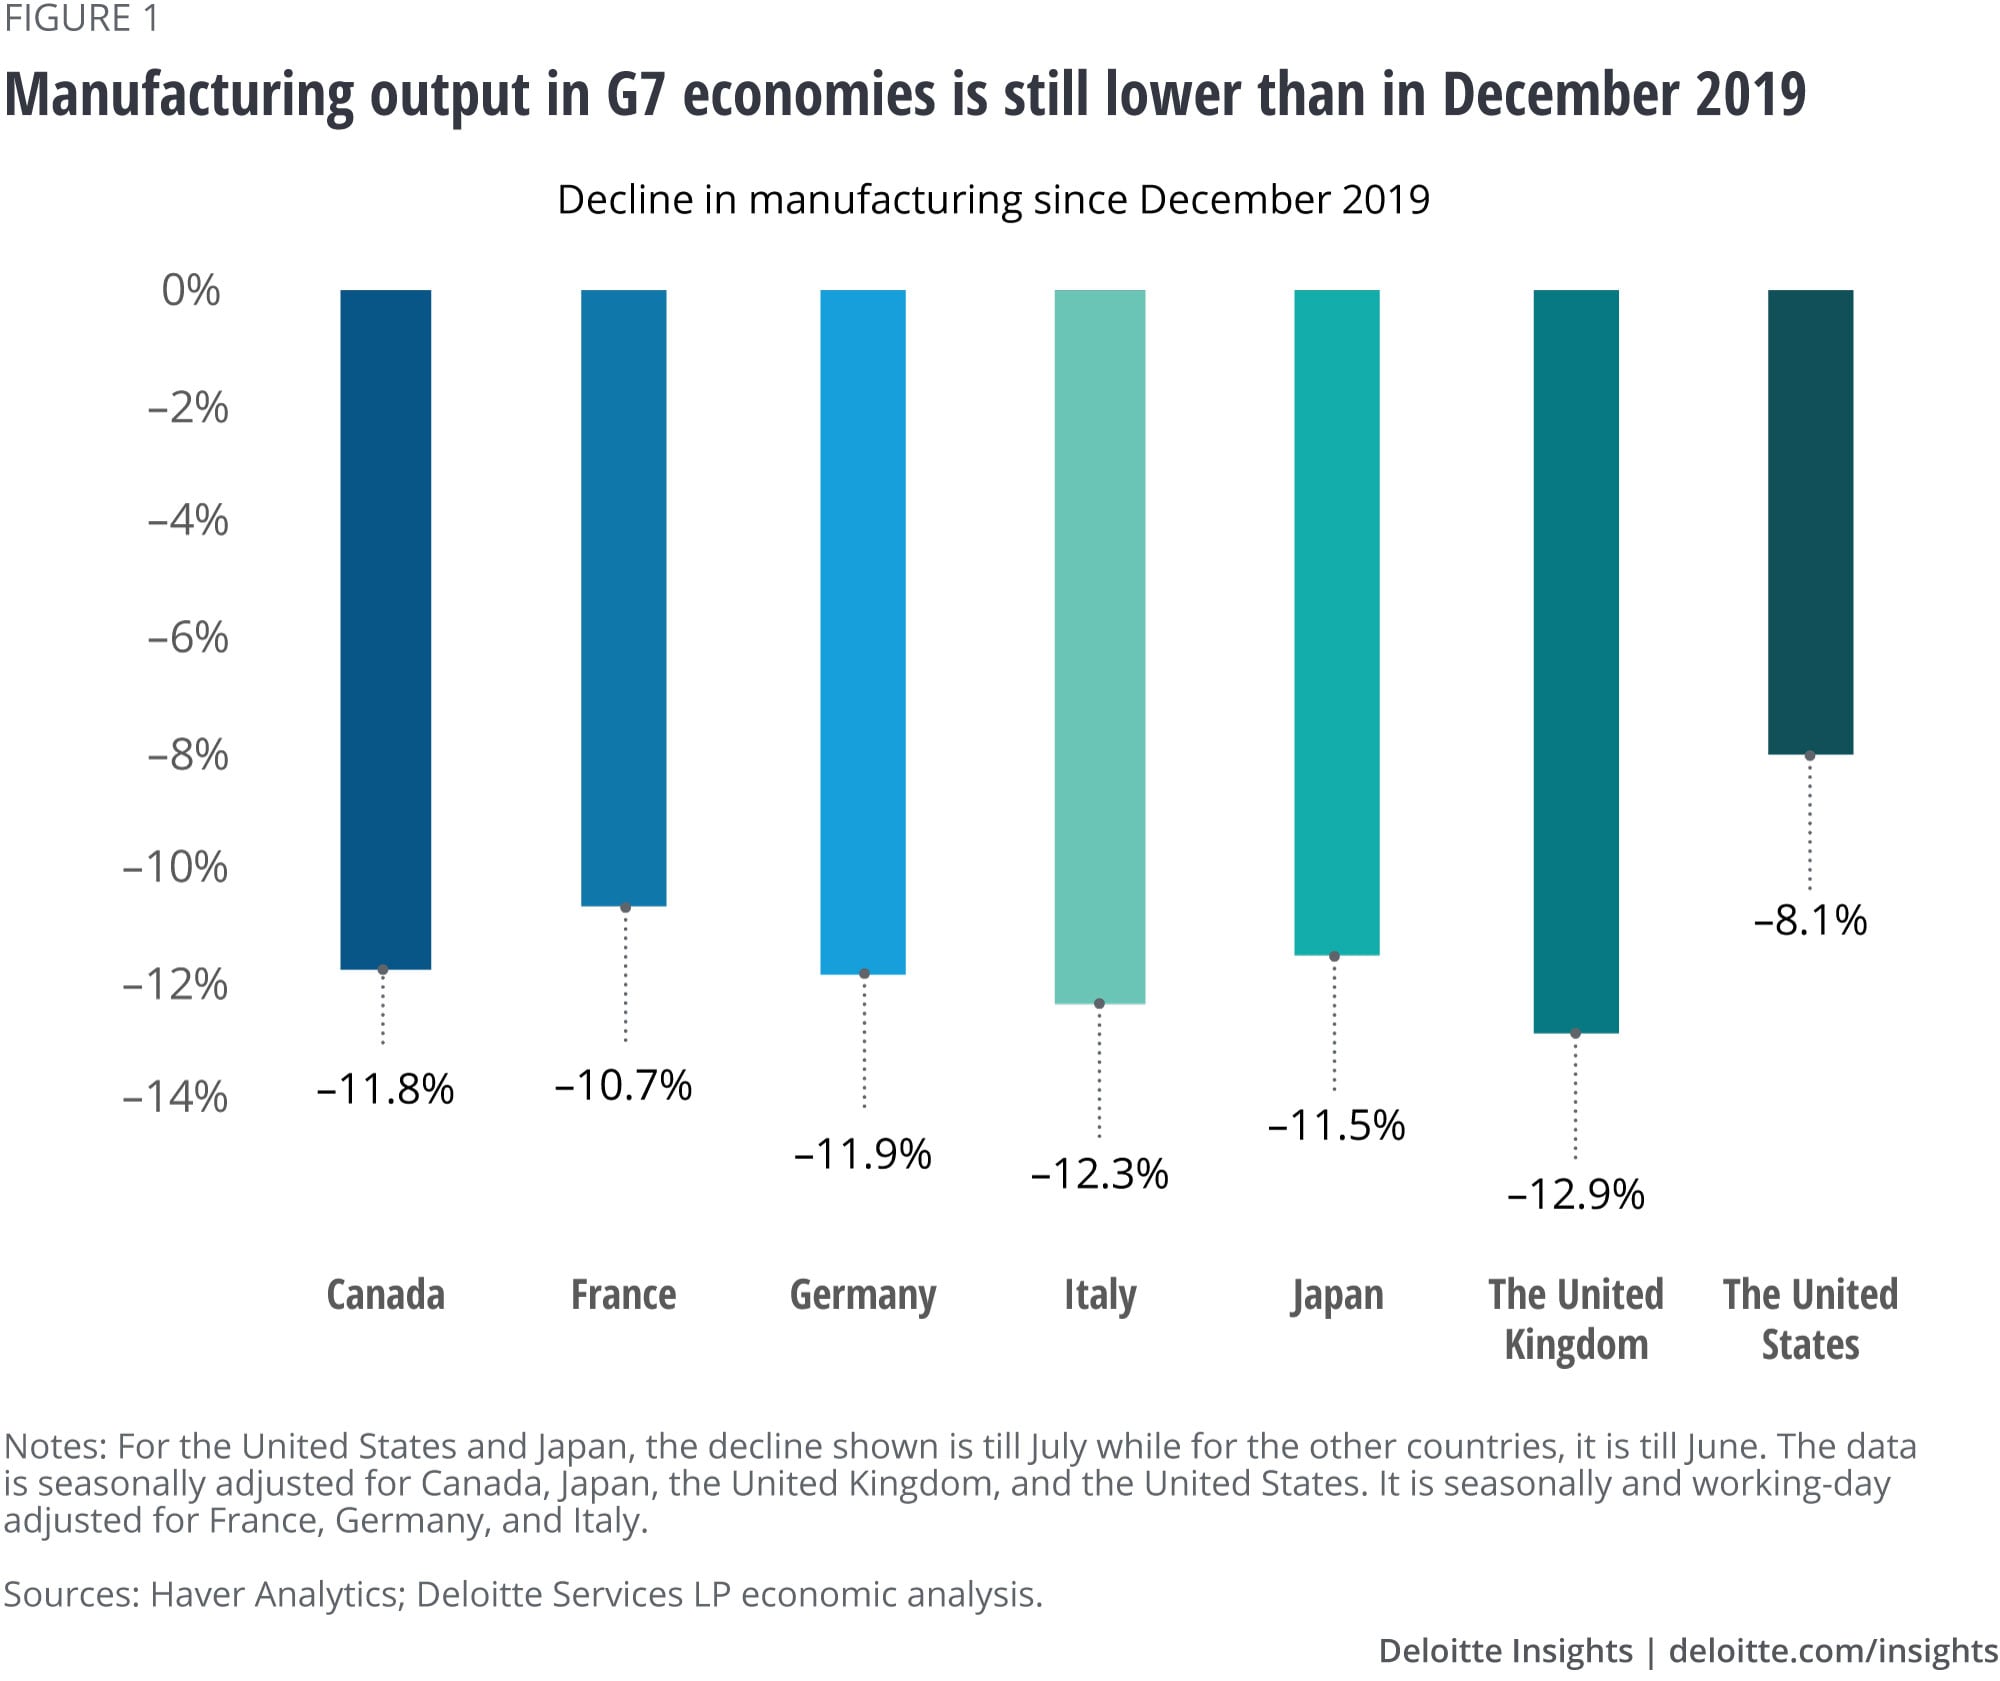 Manufacturing output in G7 economies is still lower than in December 2019